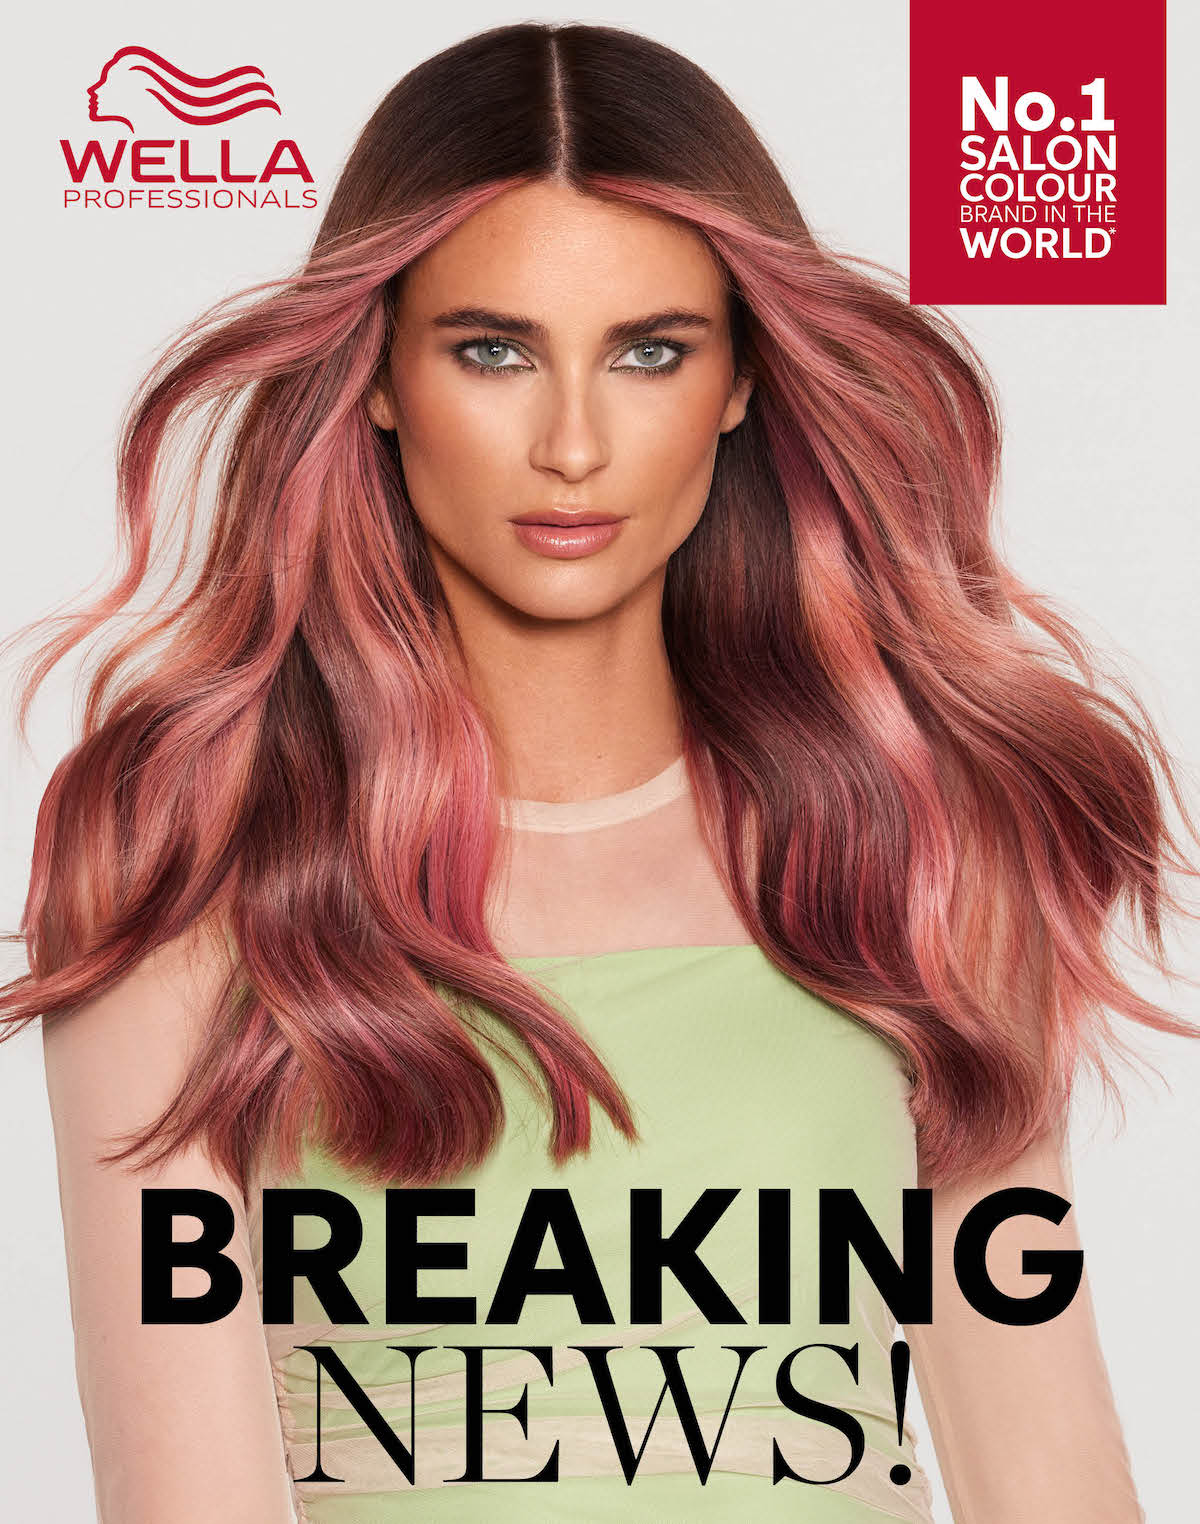 We Are Suppliers Of WELLA Professionals Colour